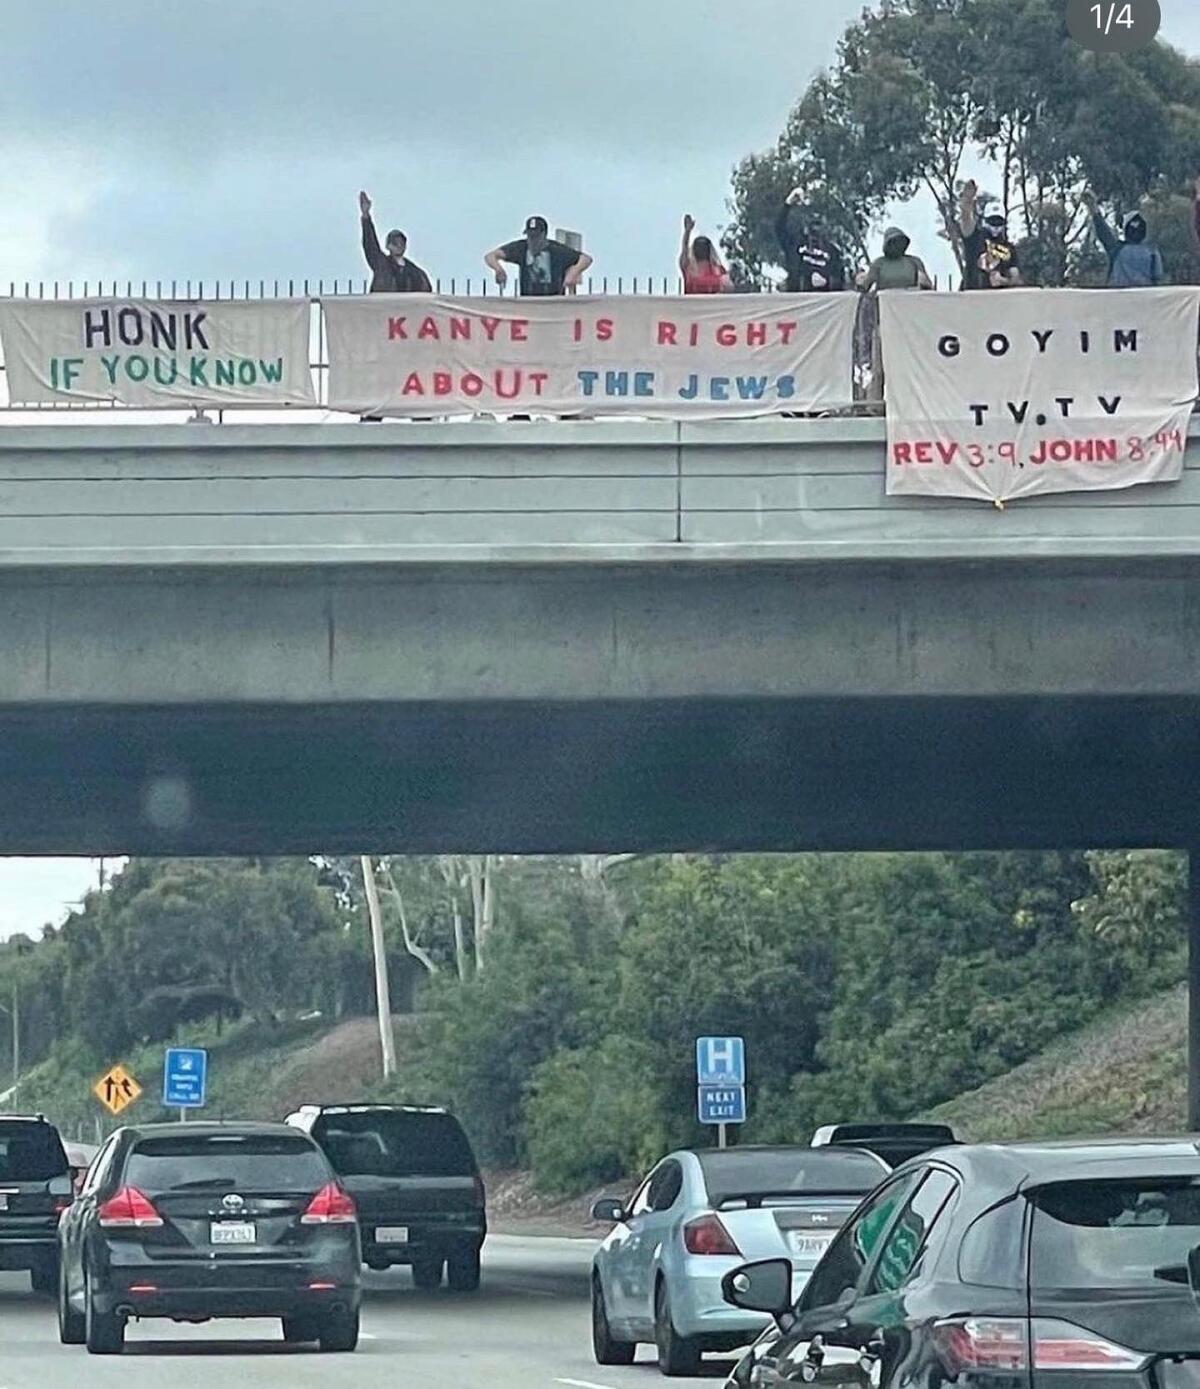 Antisemitic banners hung on a freeway overpass while people stand behind them